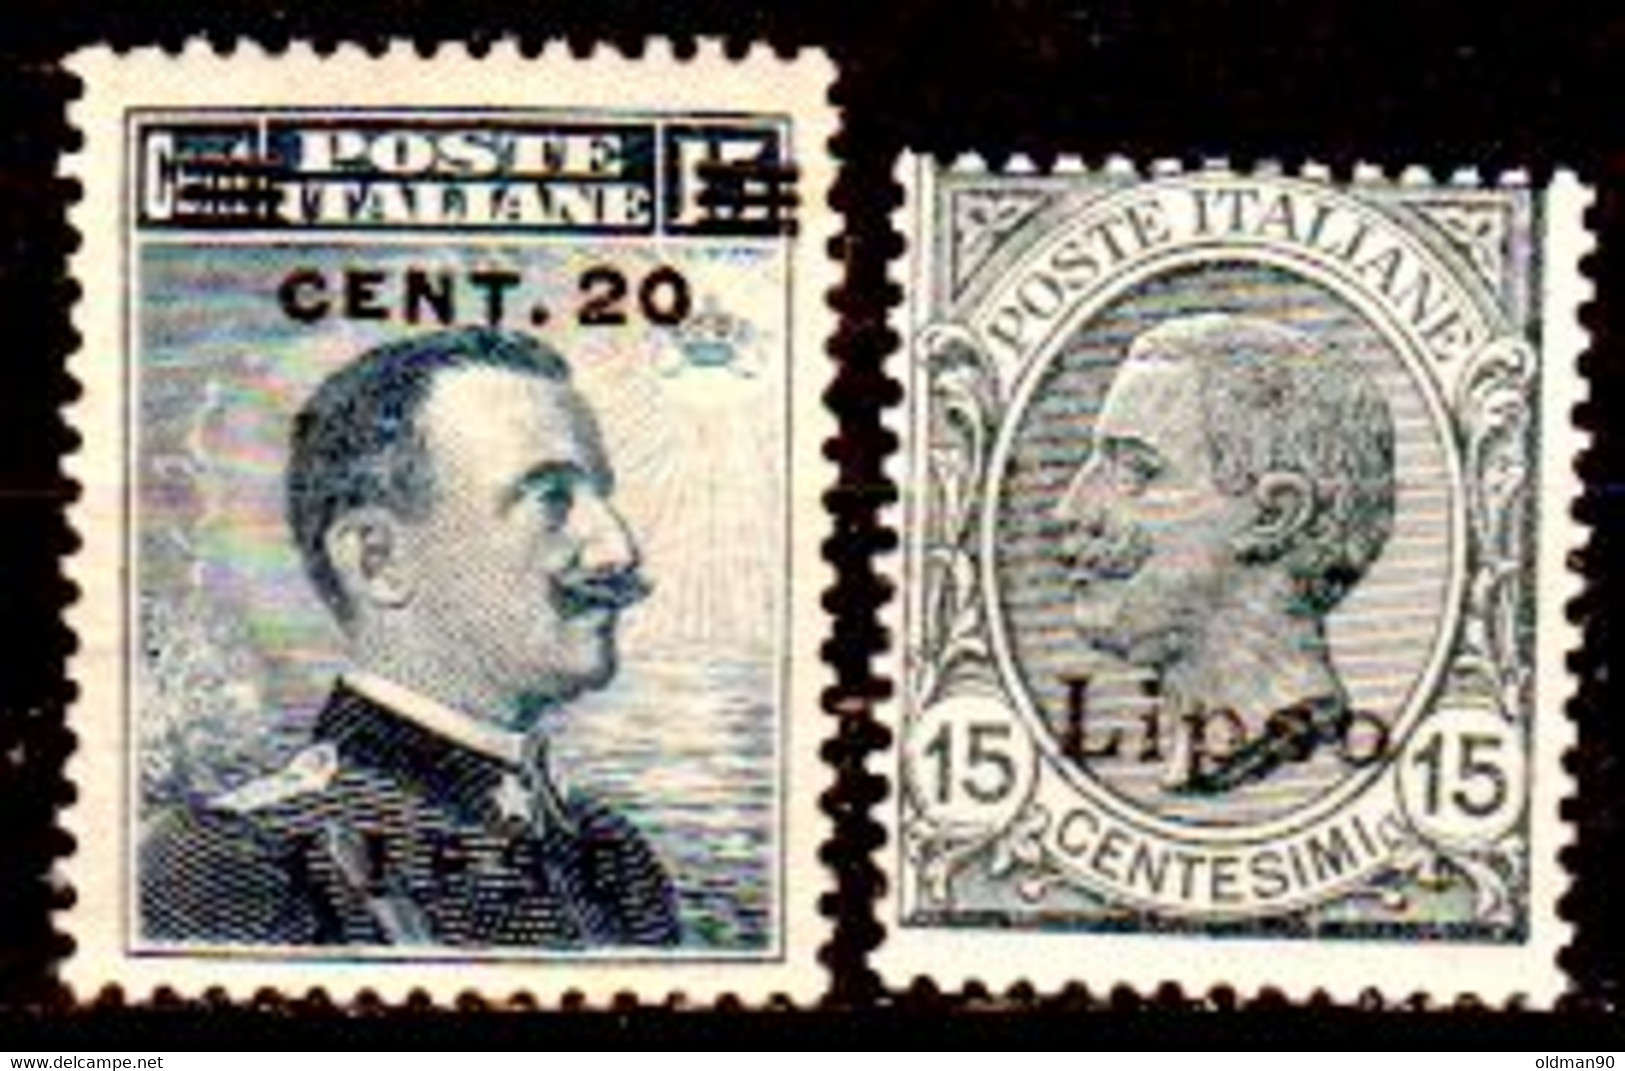 Egeo-OS-299- Lipso: Original Stamps And Overprint 1916-21 (++) MNH - Quality In Your Opinion. - Egée (Lipso)